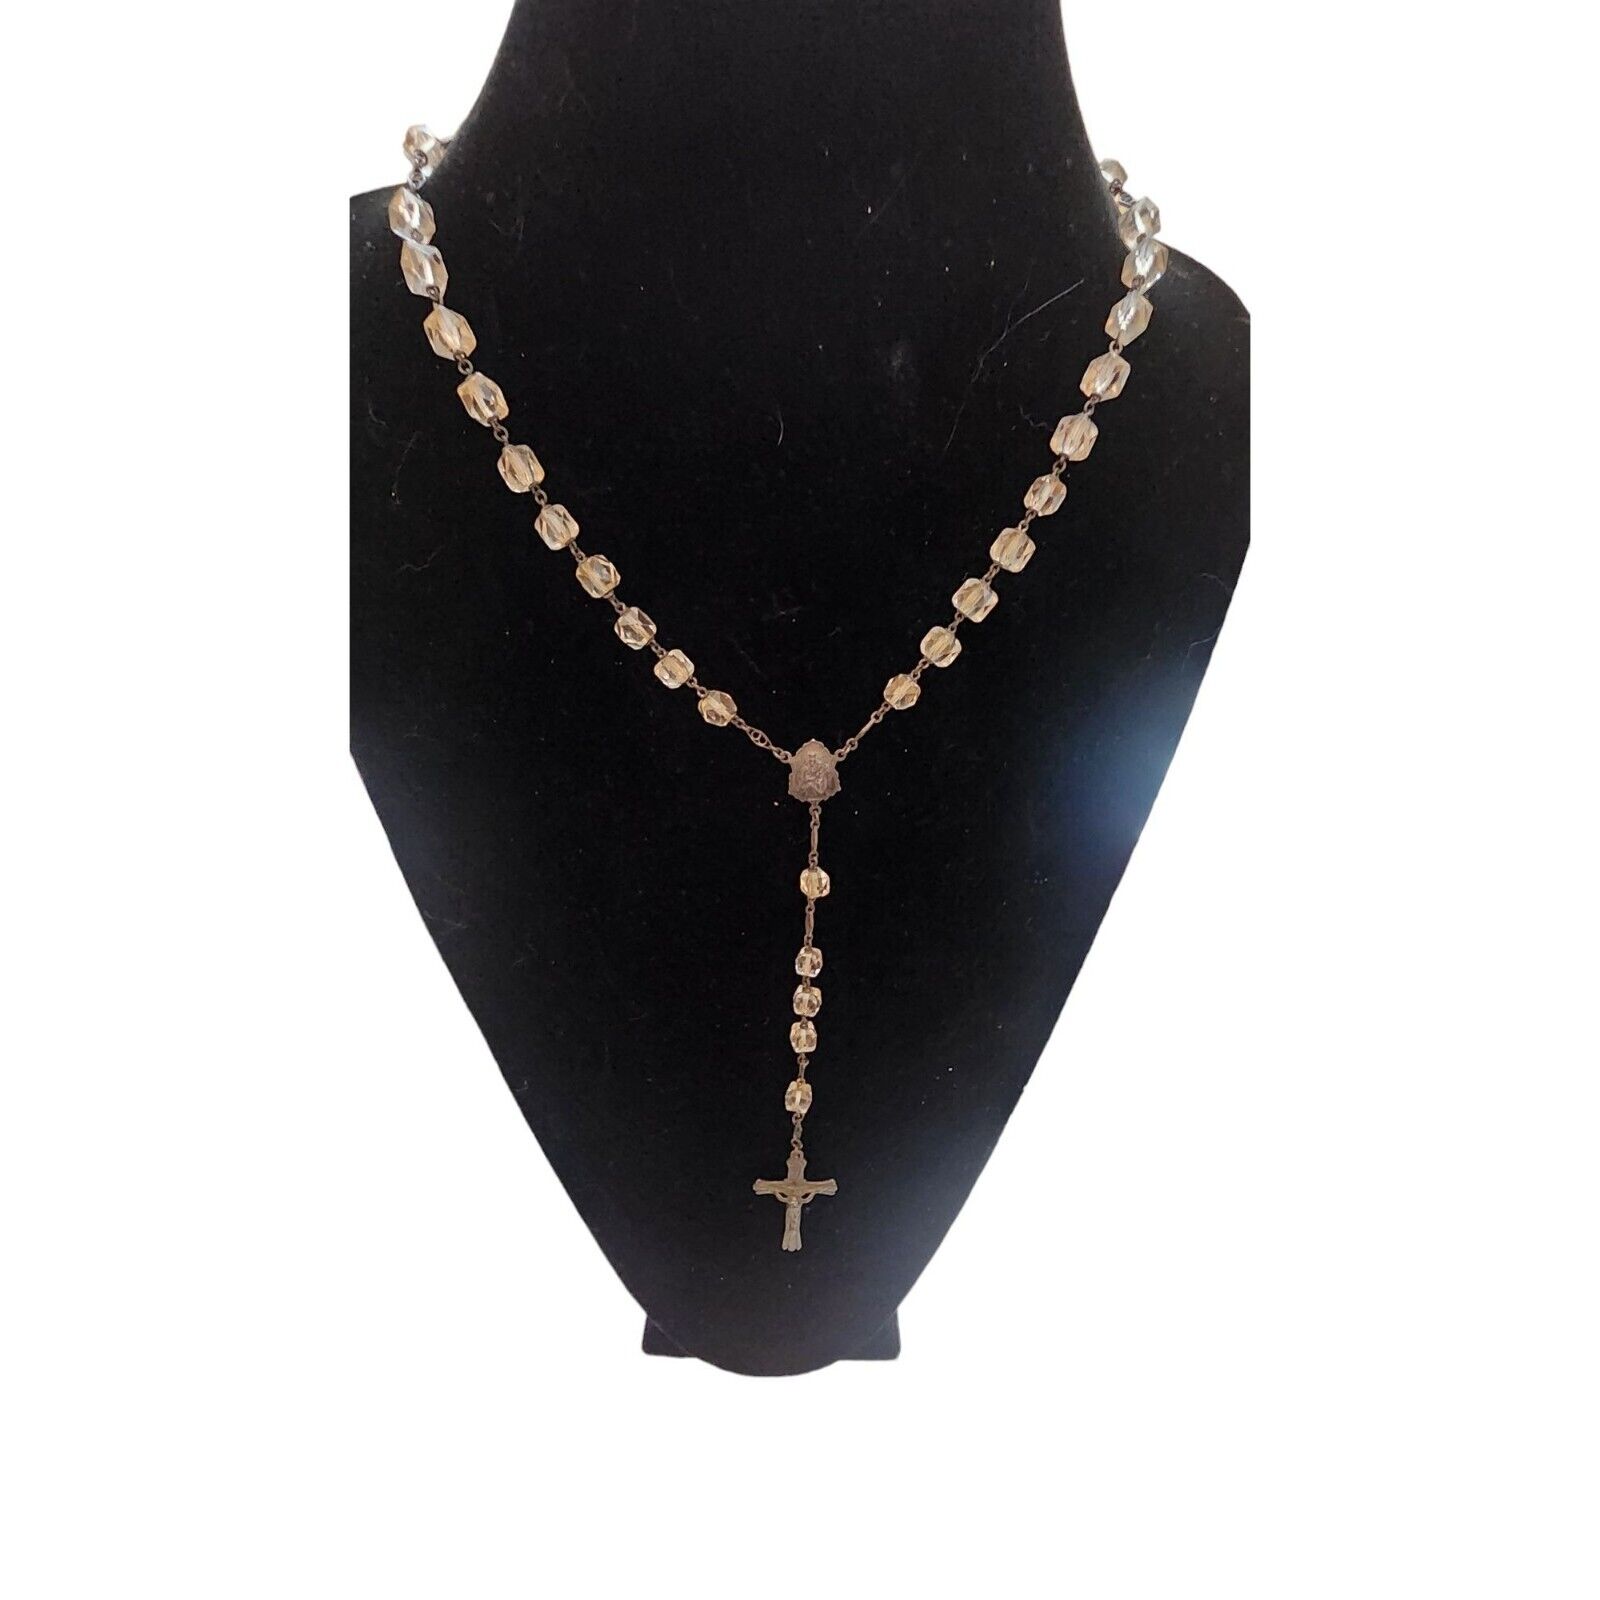 Antique Exceptional Uniquely Faceted Crystal Rosary Necklace (A2873)